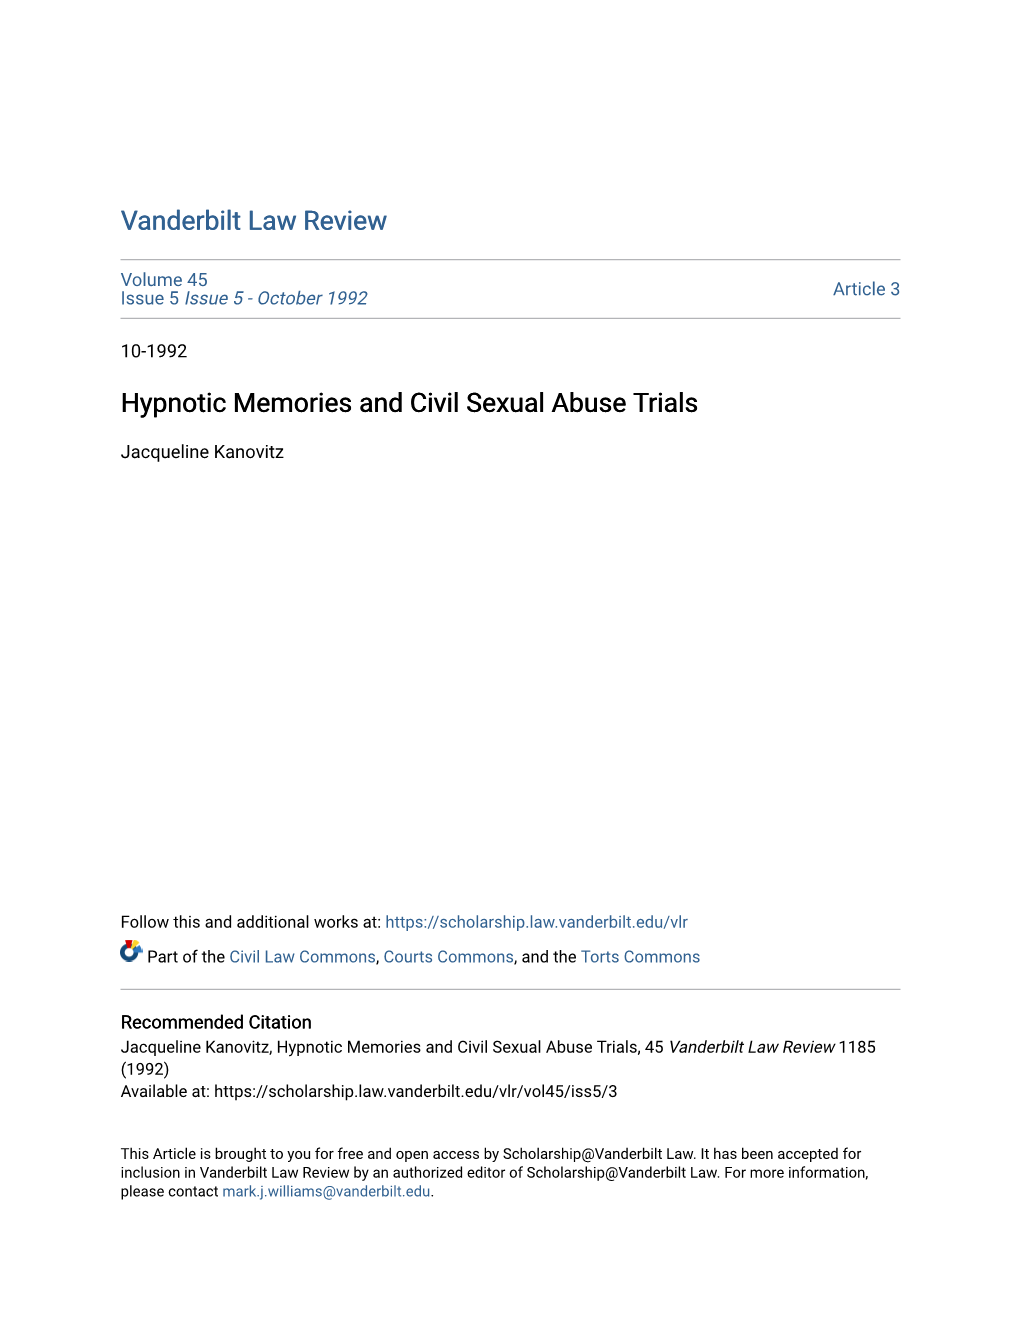 Hypnotic Memories and Civil Sexual Abuse Trials